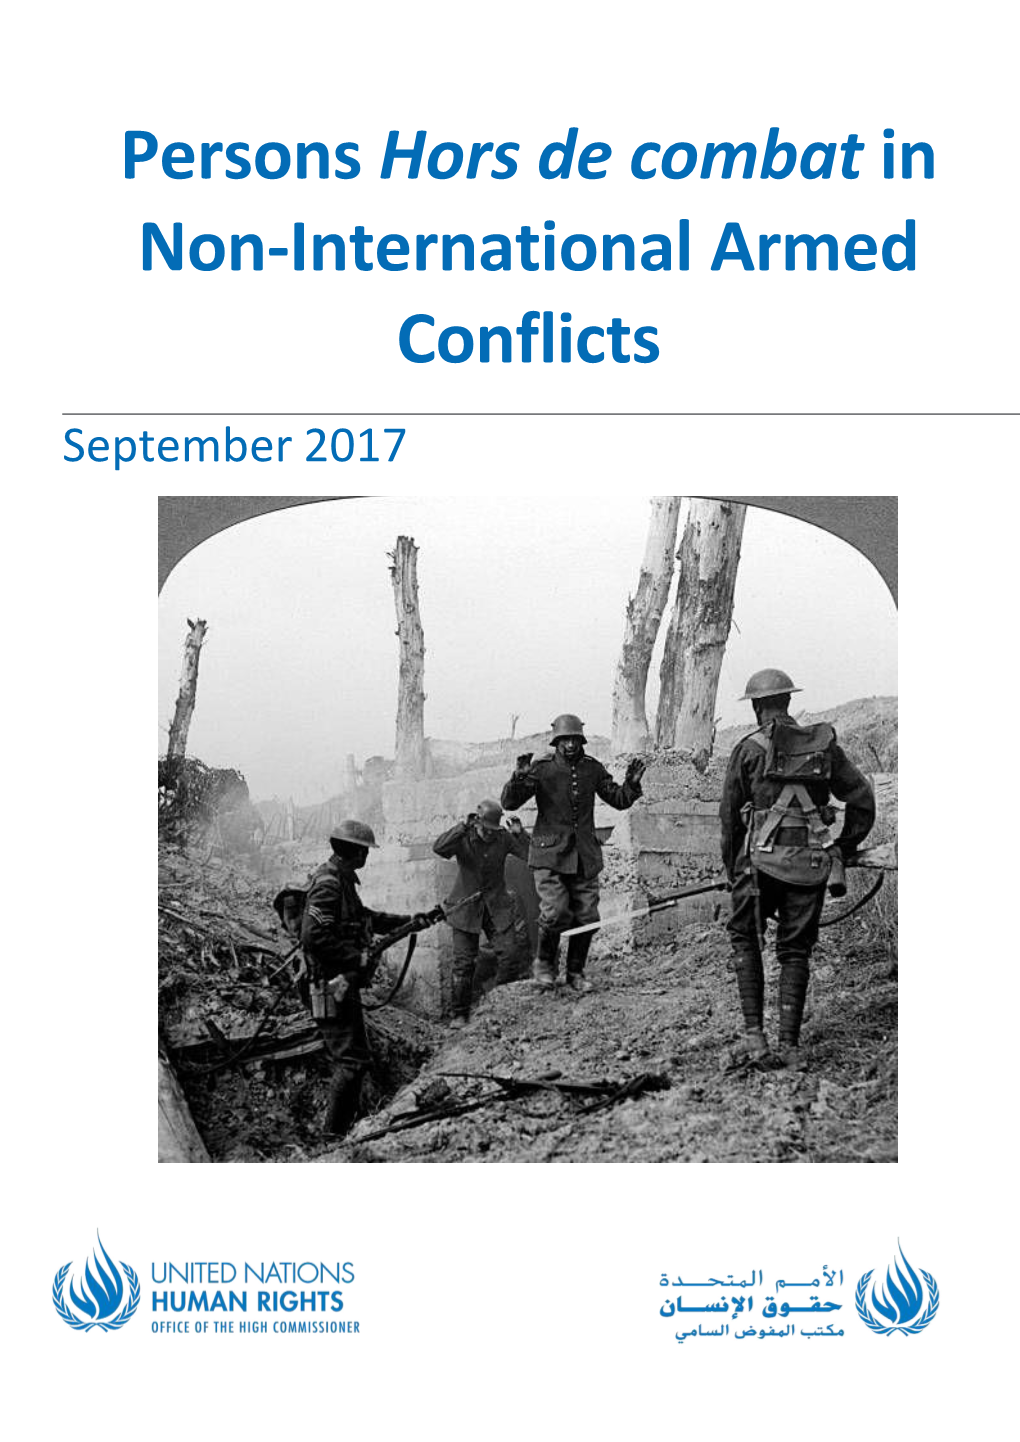 Persons Hors De Combat in Non-International Armed Conflicts